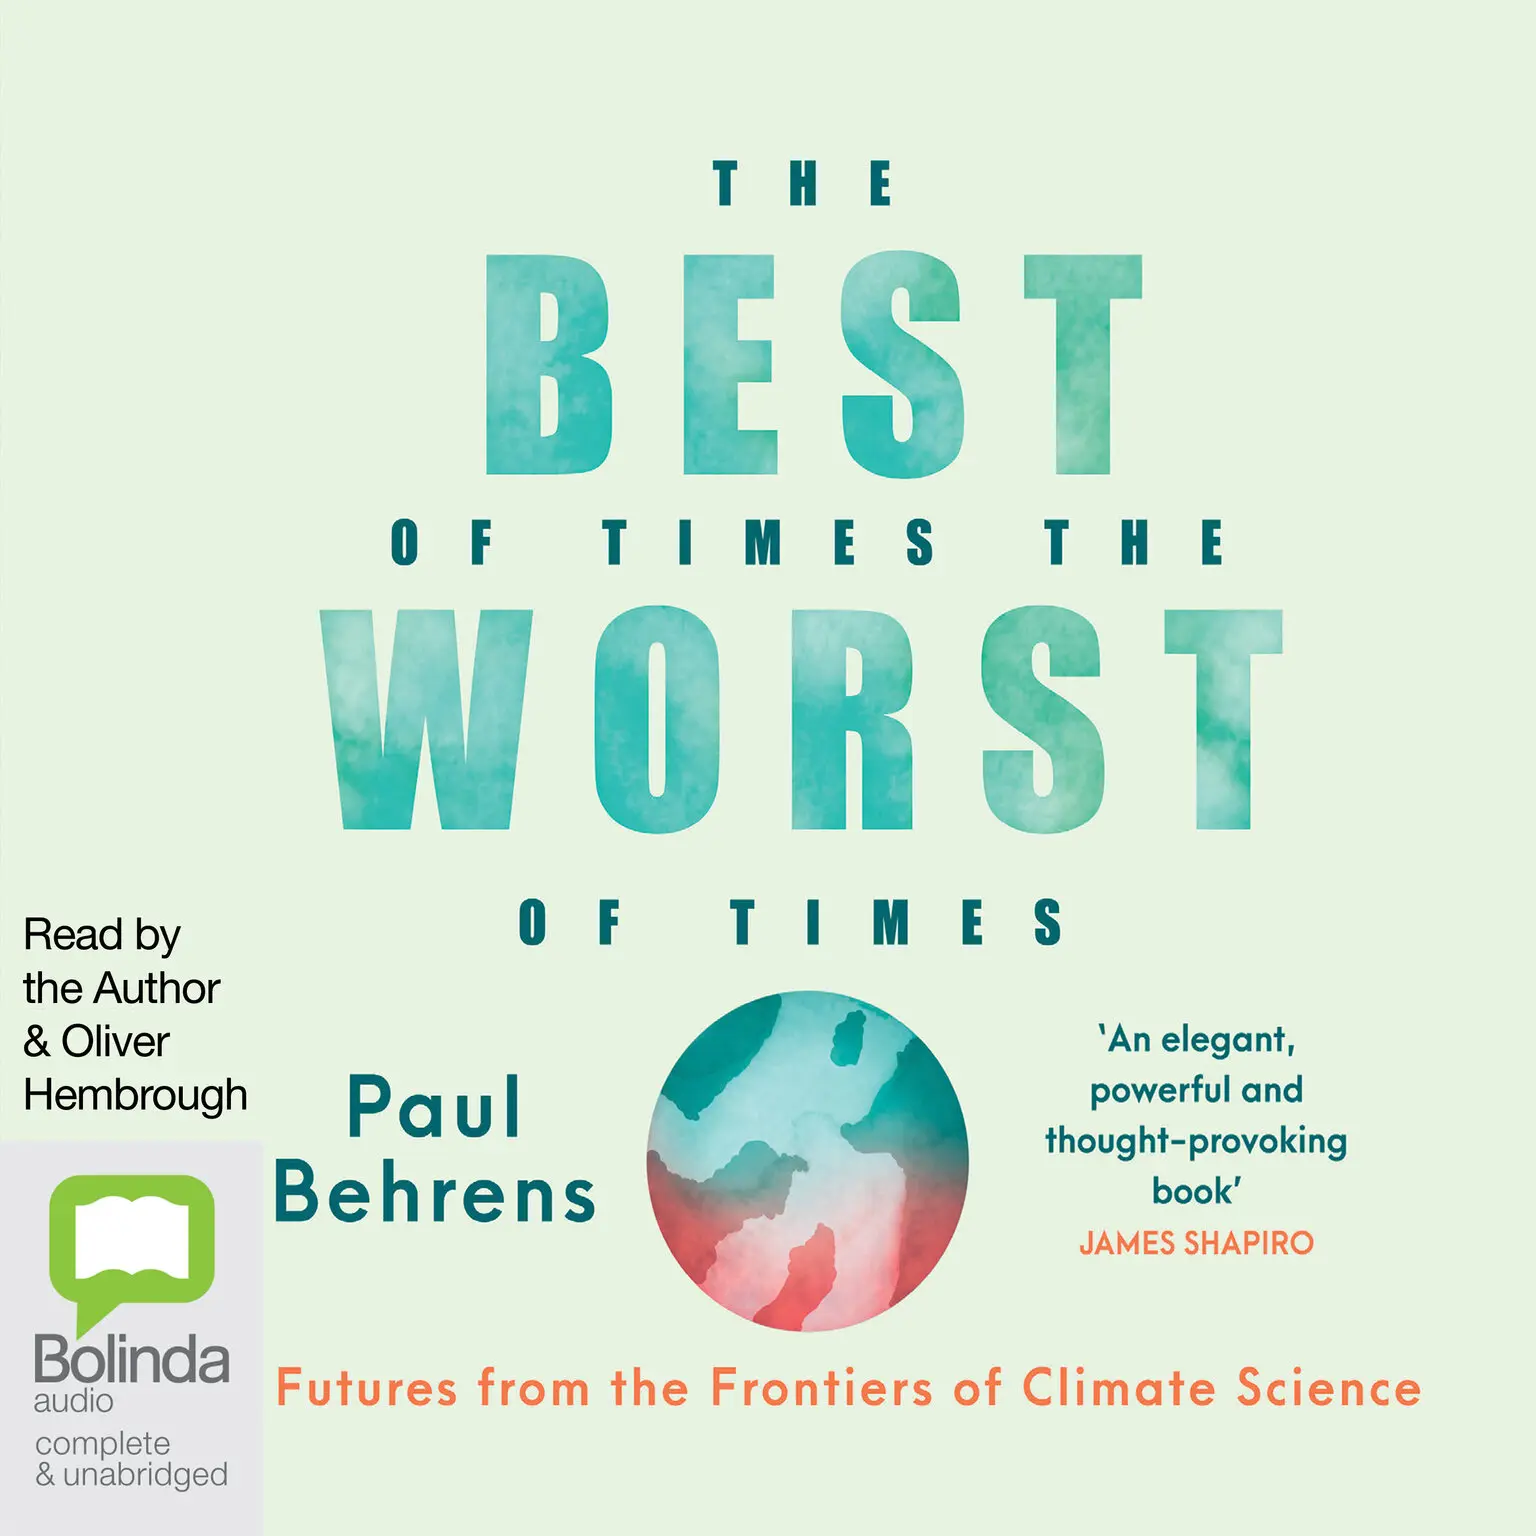 Dr Paul Behrens, Dr Paul Behrens, Oliver Hembrough: The Best of Times, the Worst of Times (AudiobookFormat, 2021, Bolinda Audio)